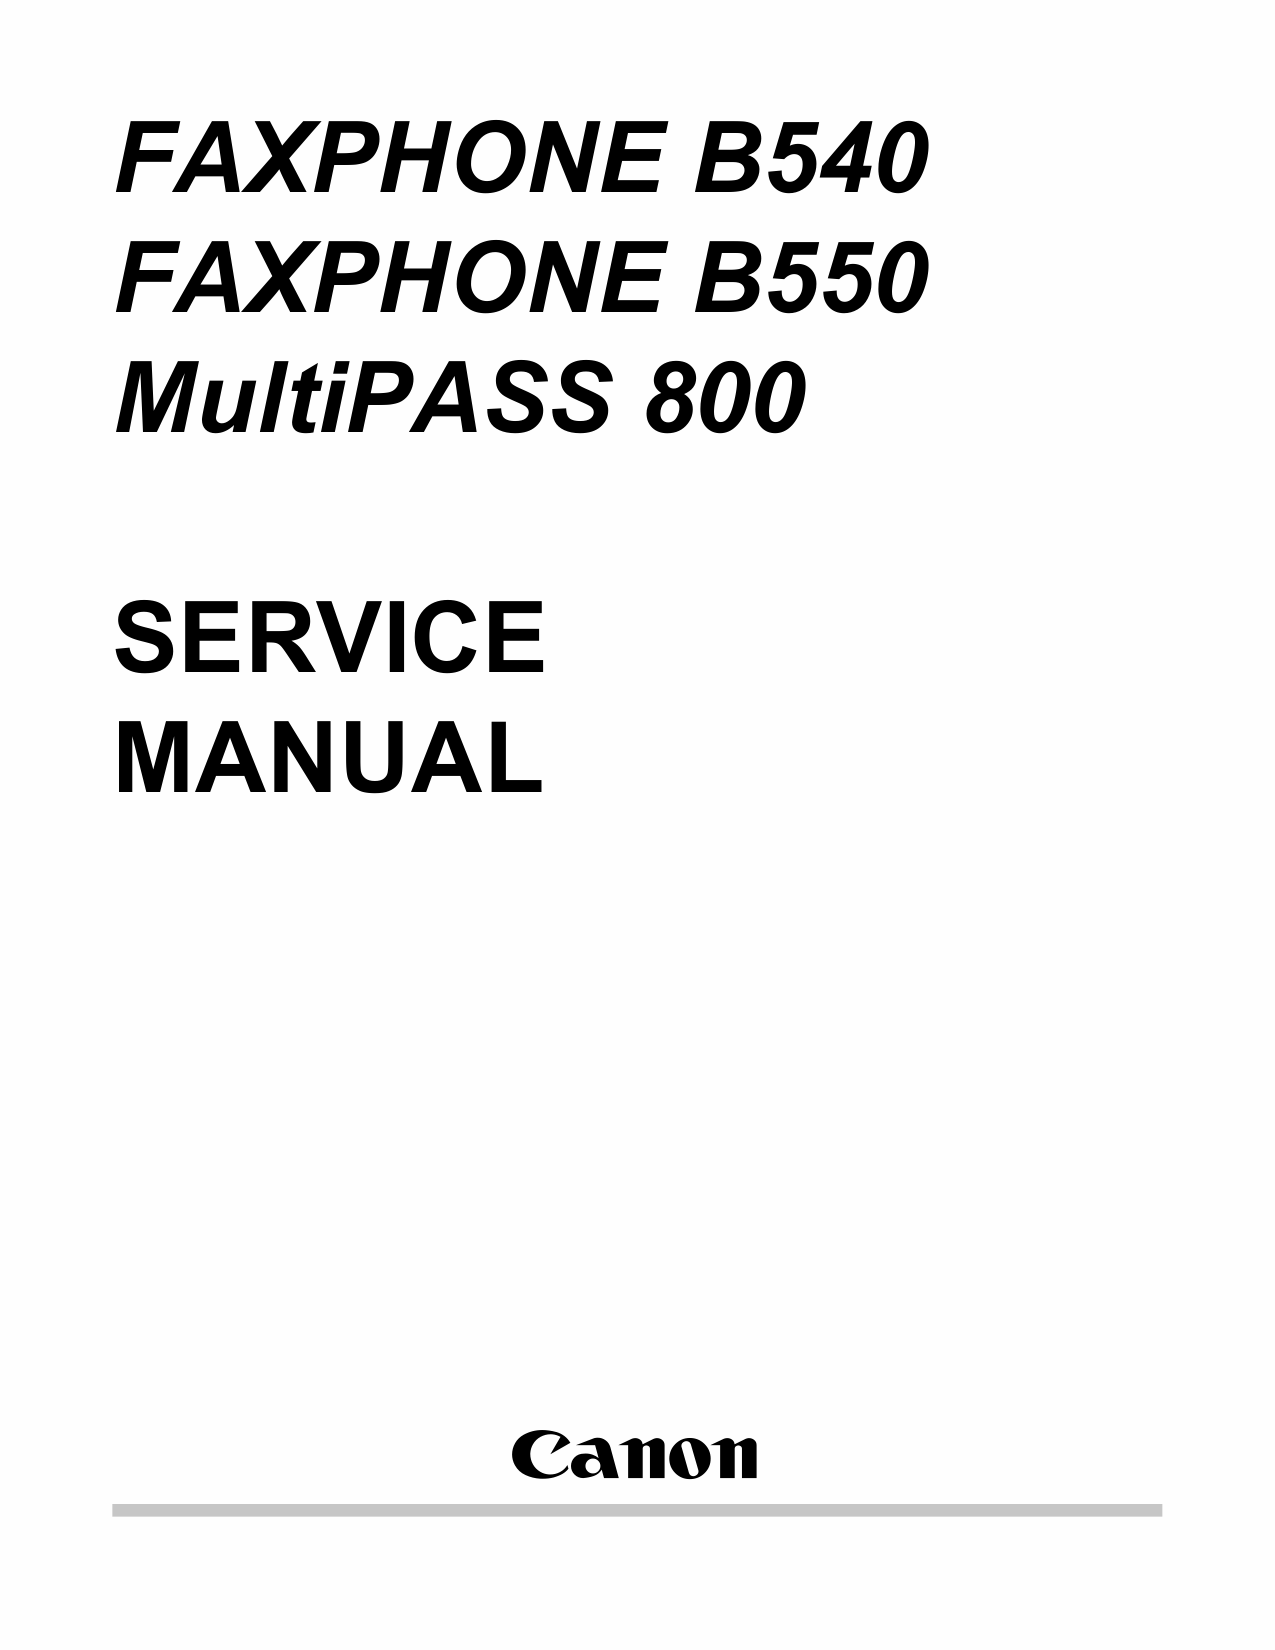 Canon FAX FP-B540 B550 MultiPass-800 Parts and Service Manual-1